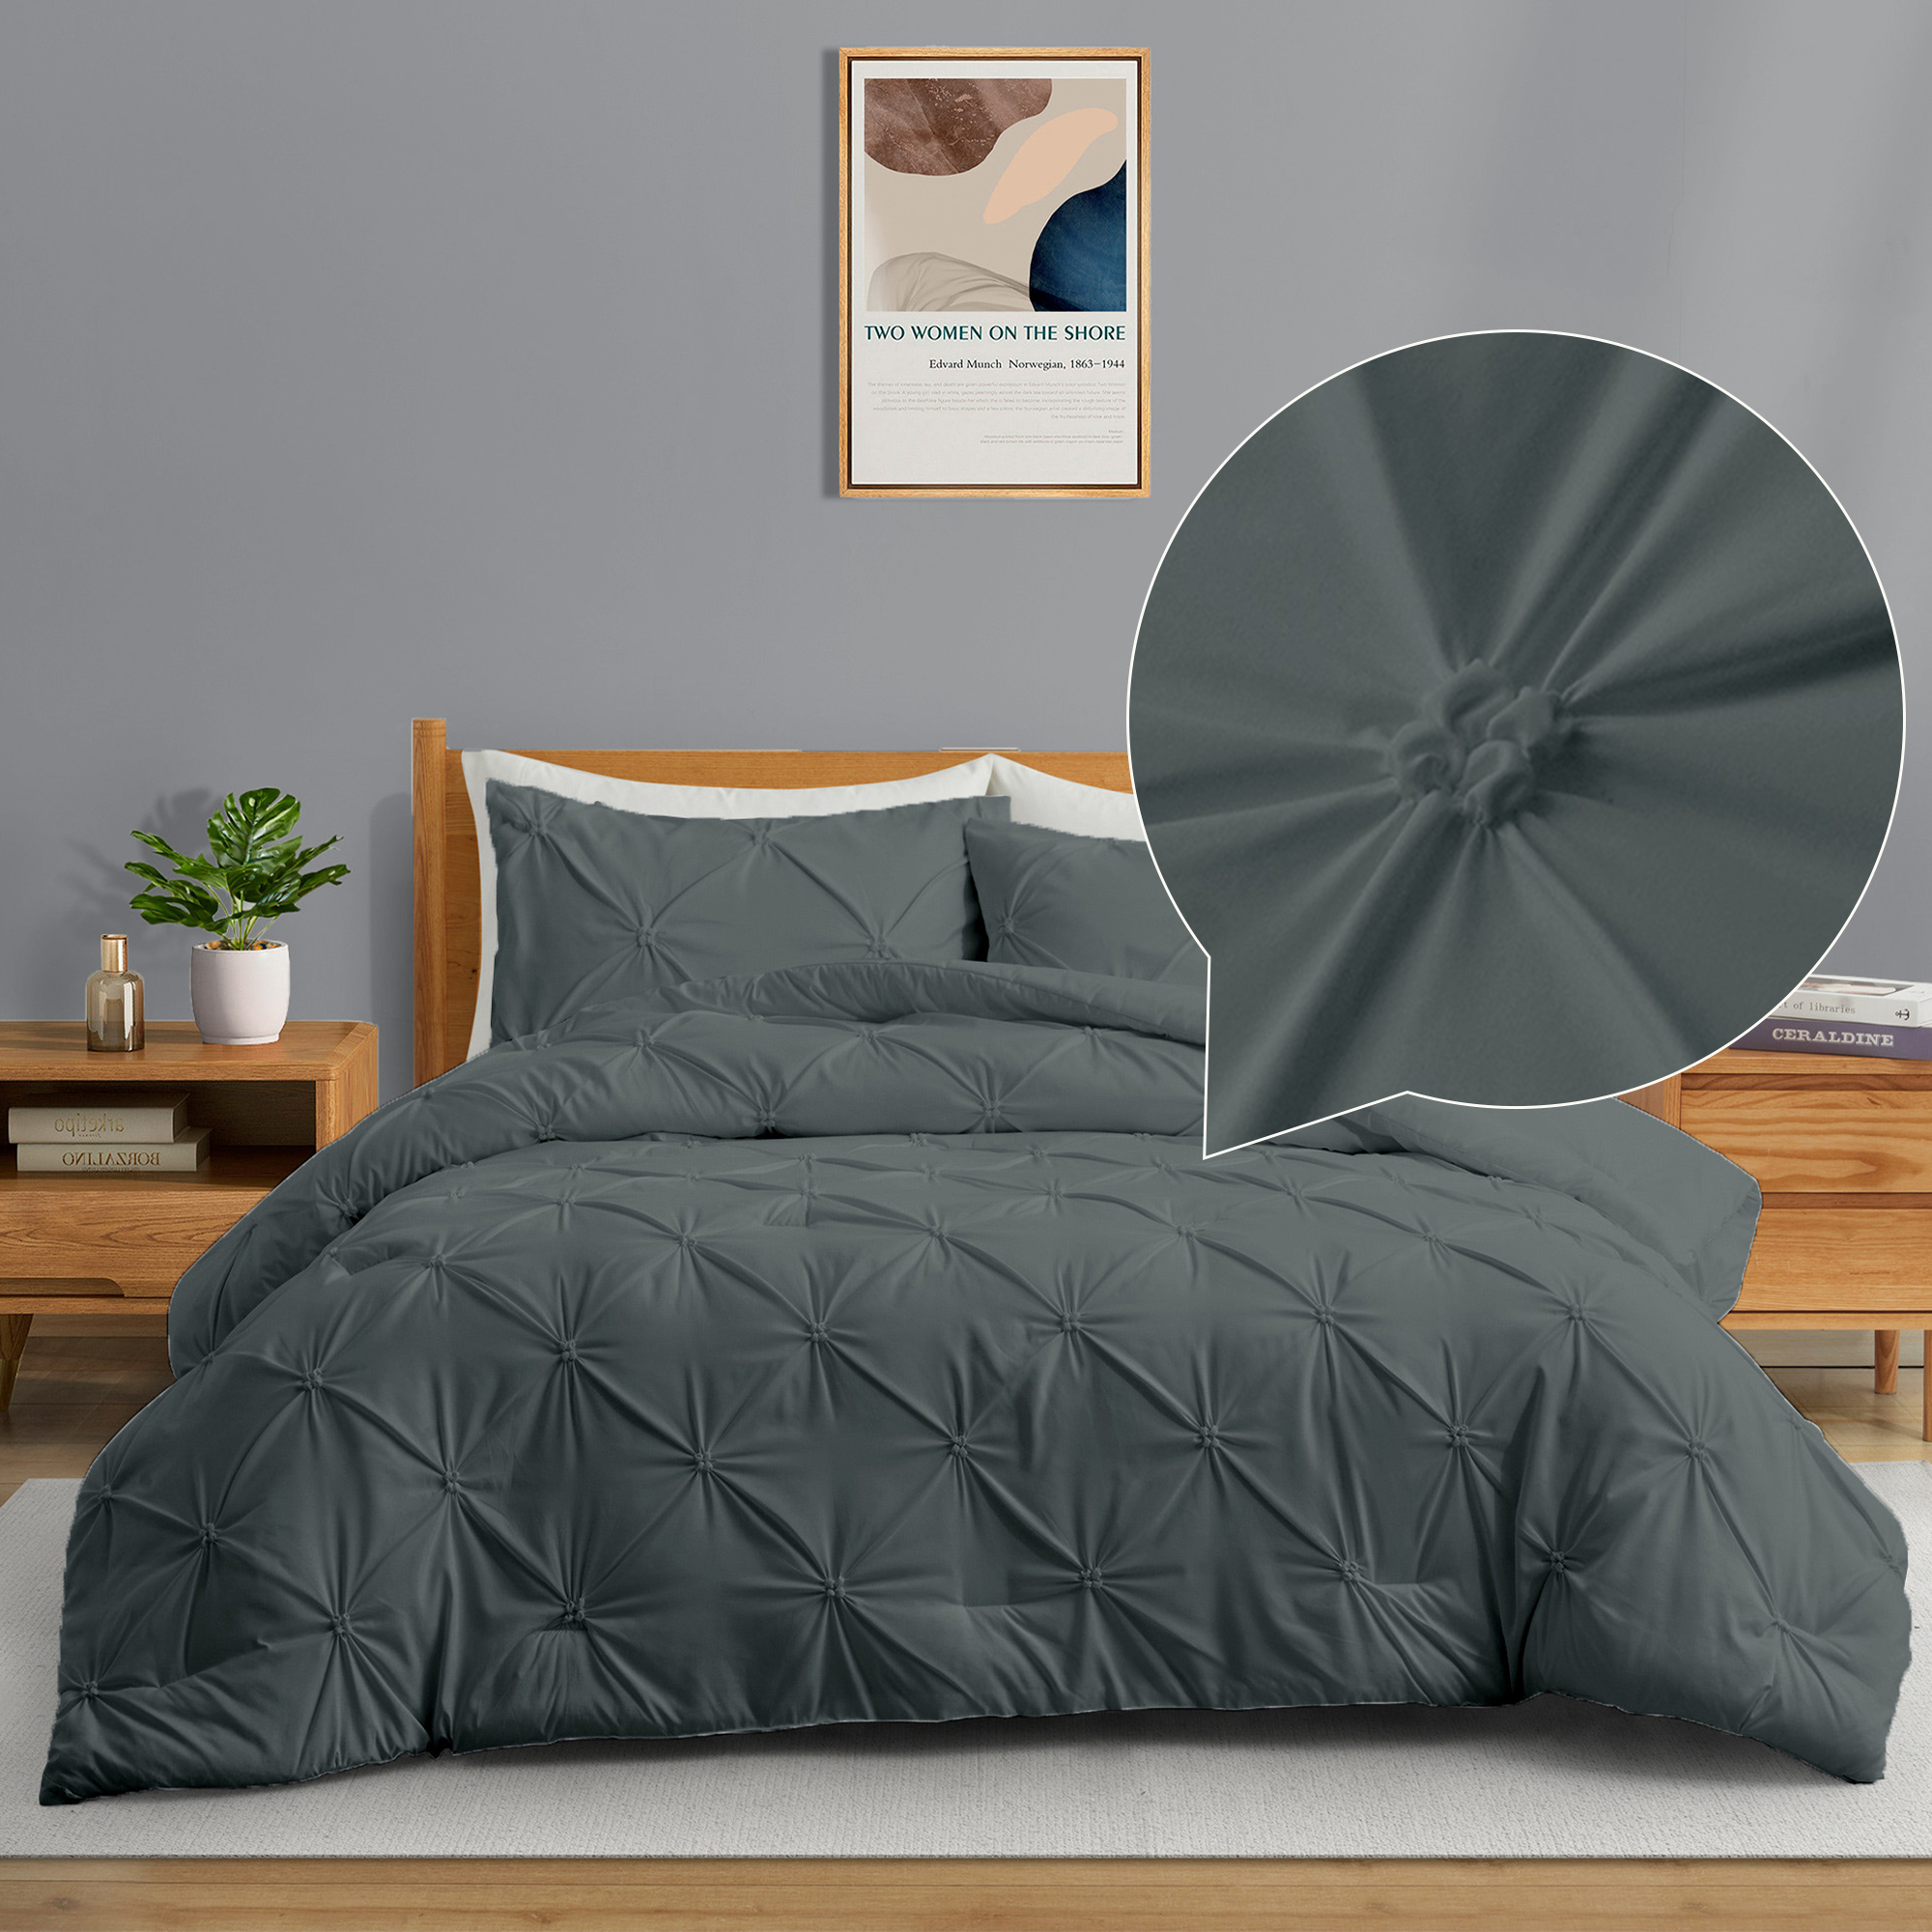 Peace Nest 3-Piece All Season Pinch Pleated Comforter Set, Charcoal, King - image 1 of 1